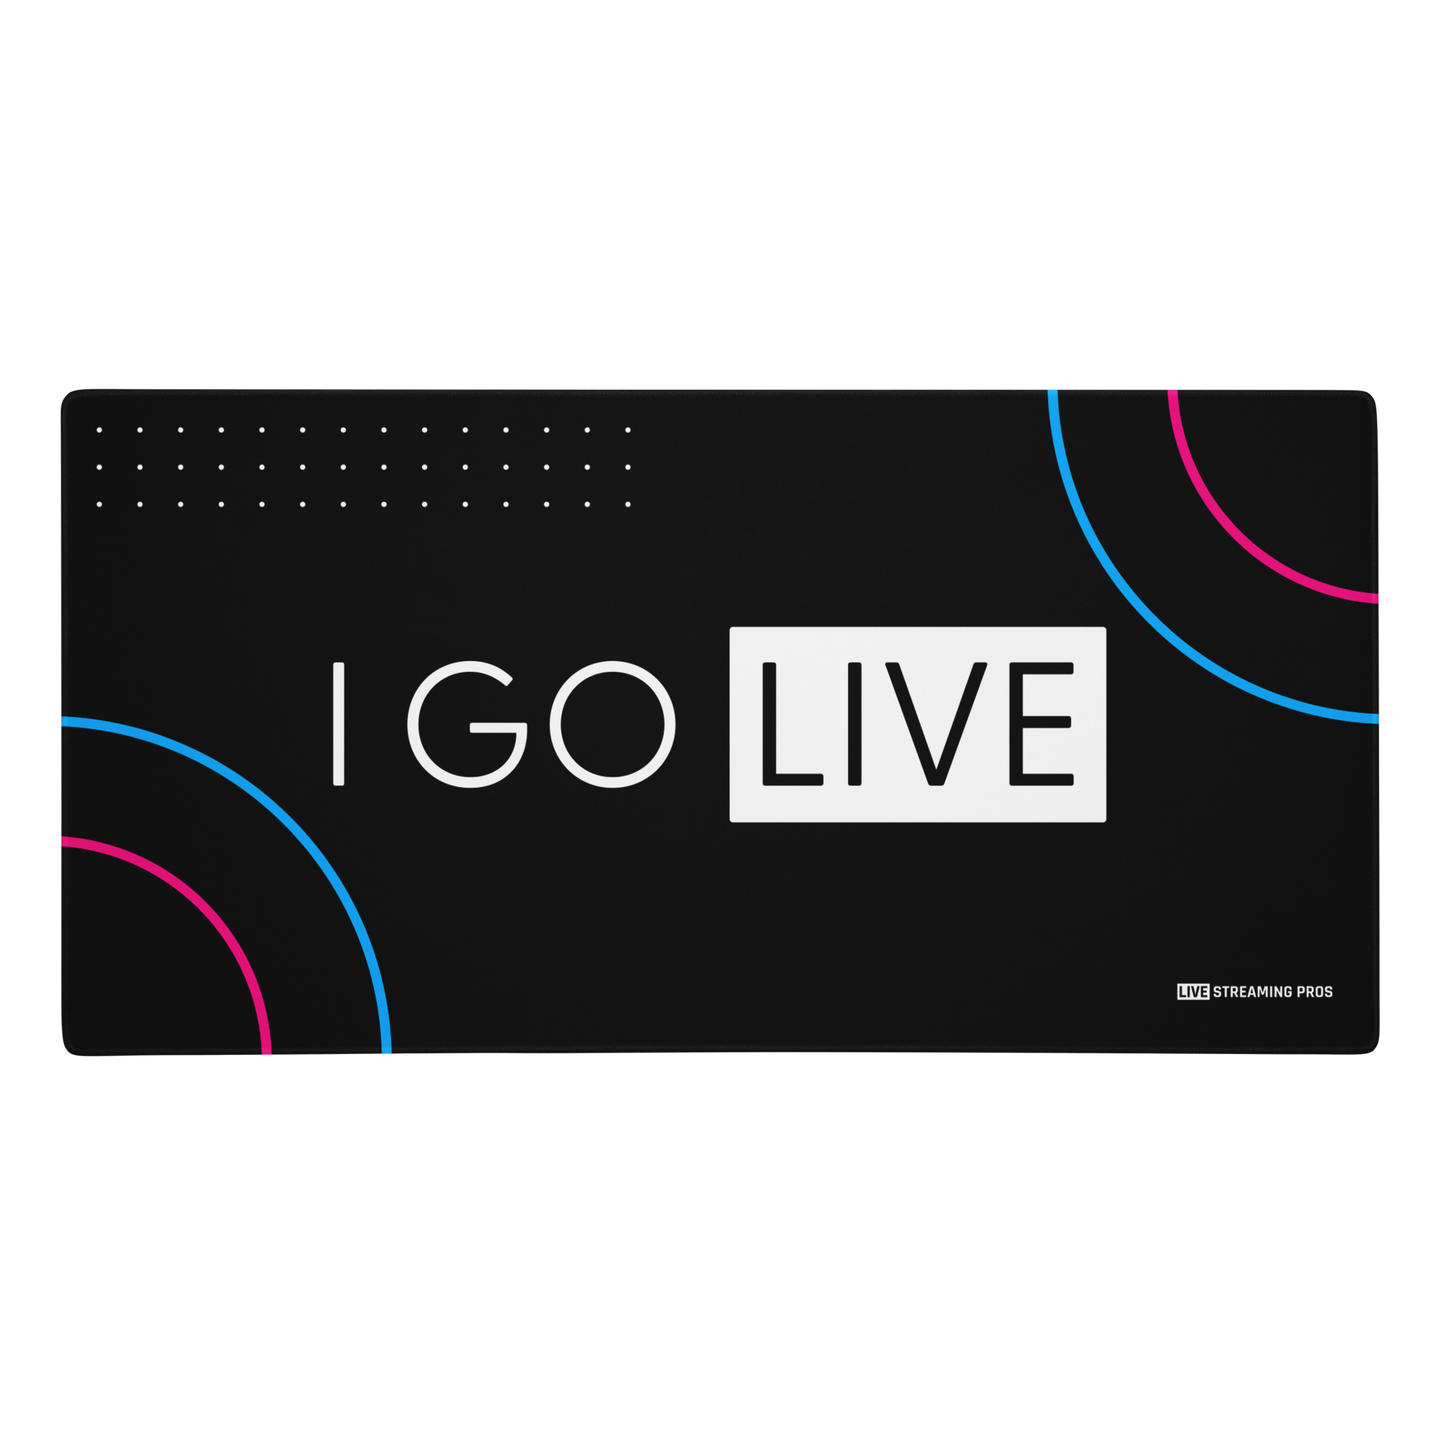 "I GO LIVE" Extra Large Gaming/Streaming Desk Pad